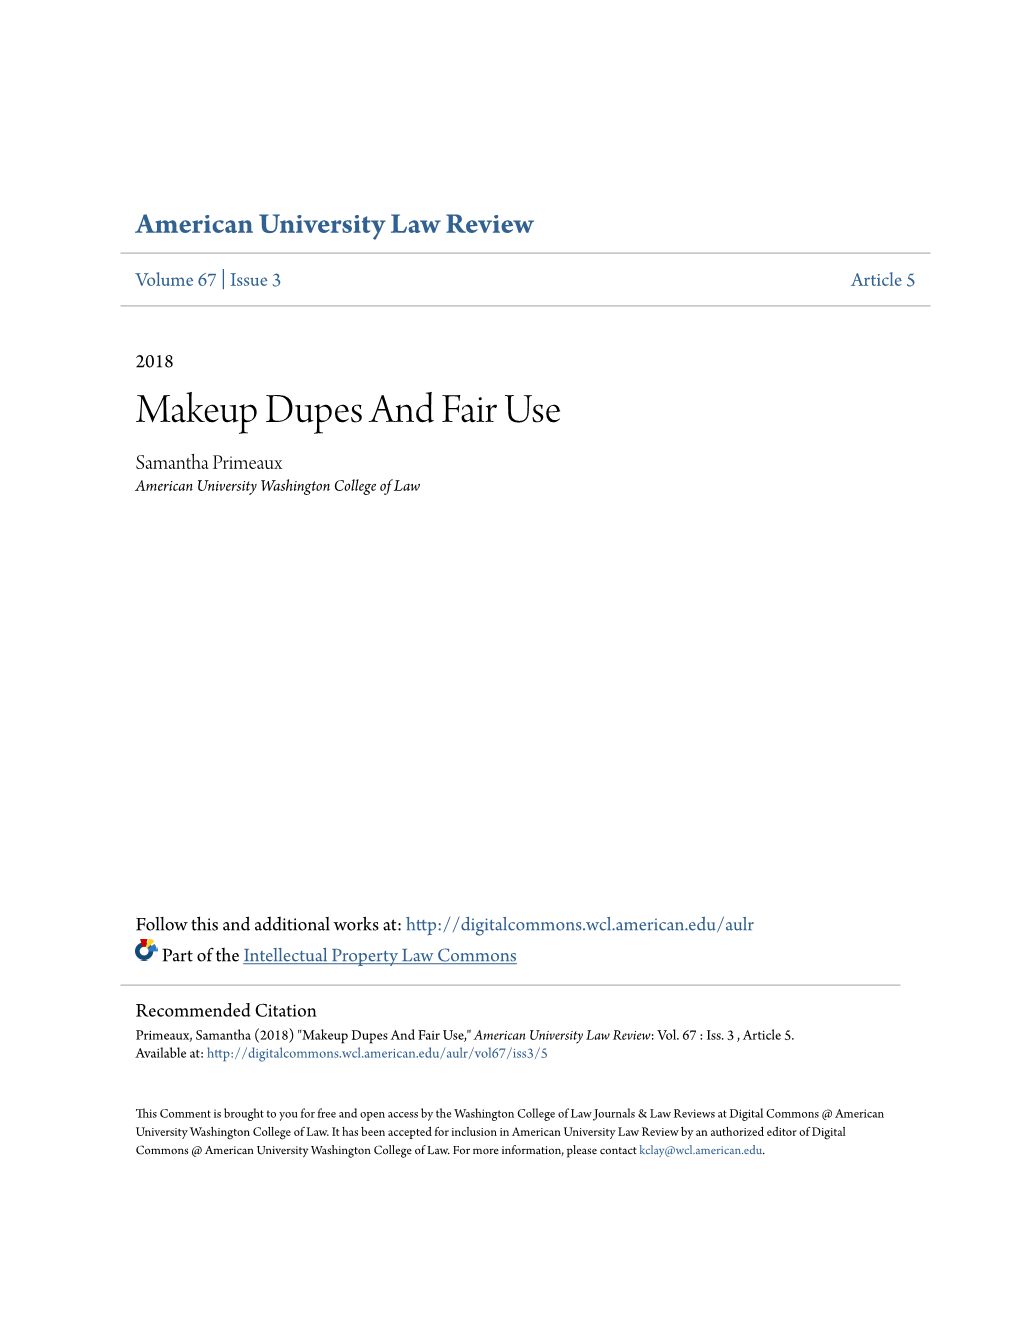 Makeup Dupes and Fair Use Samantha Primeaux American University Washington College of Law